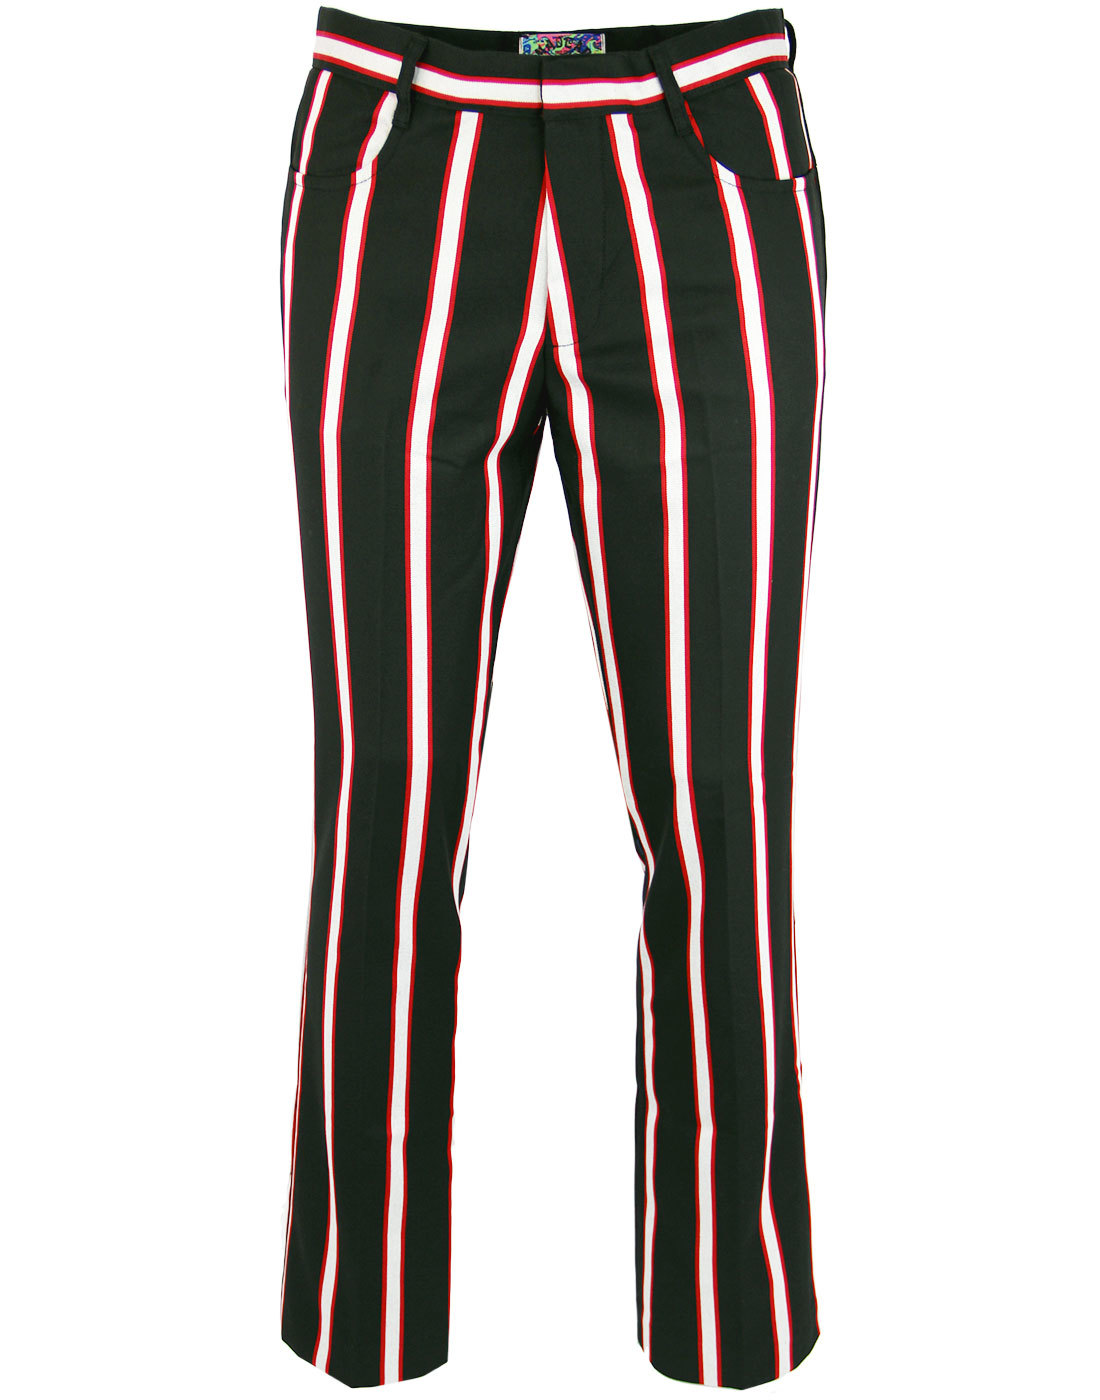 black trousers with white stripe mens